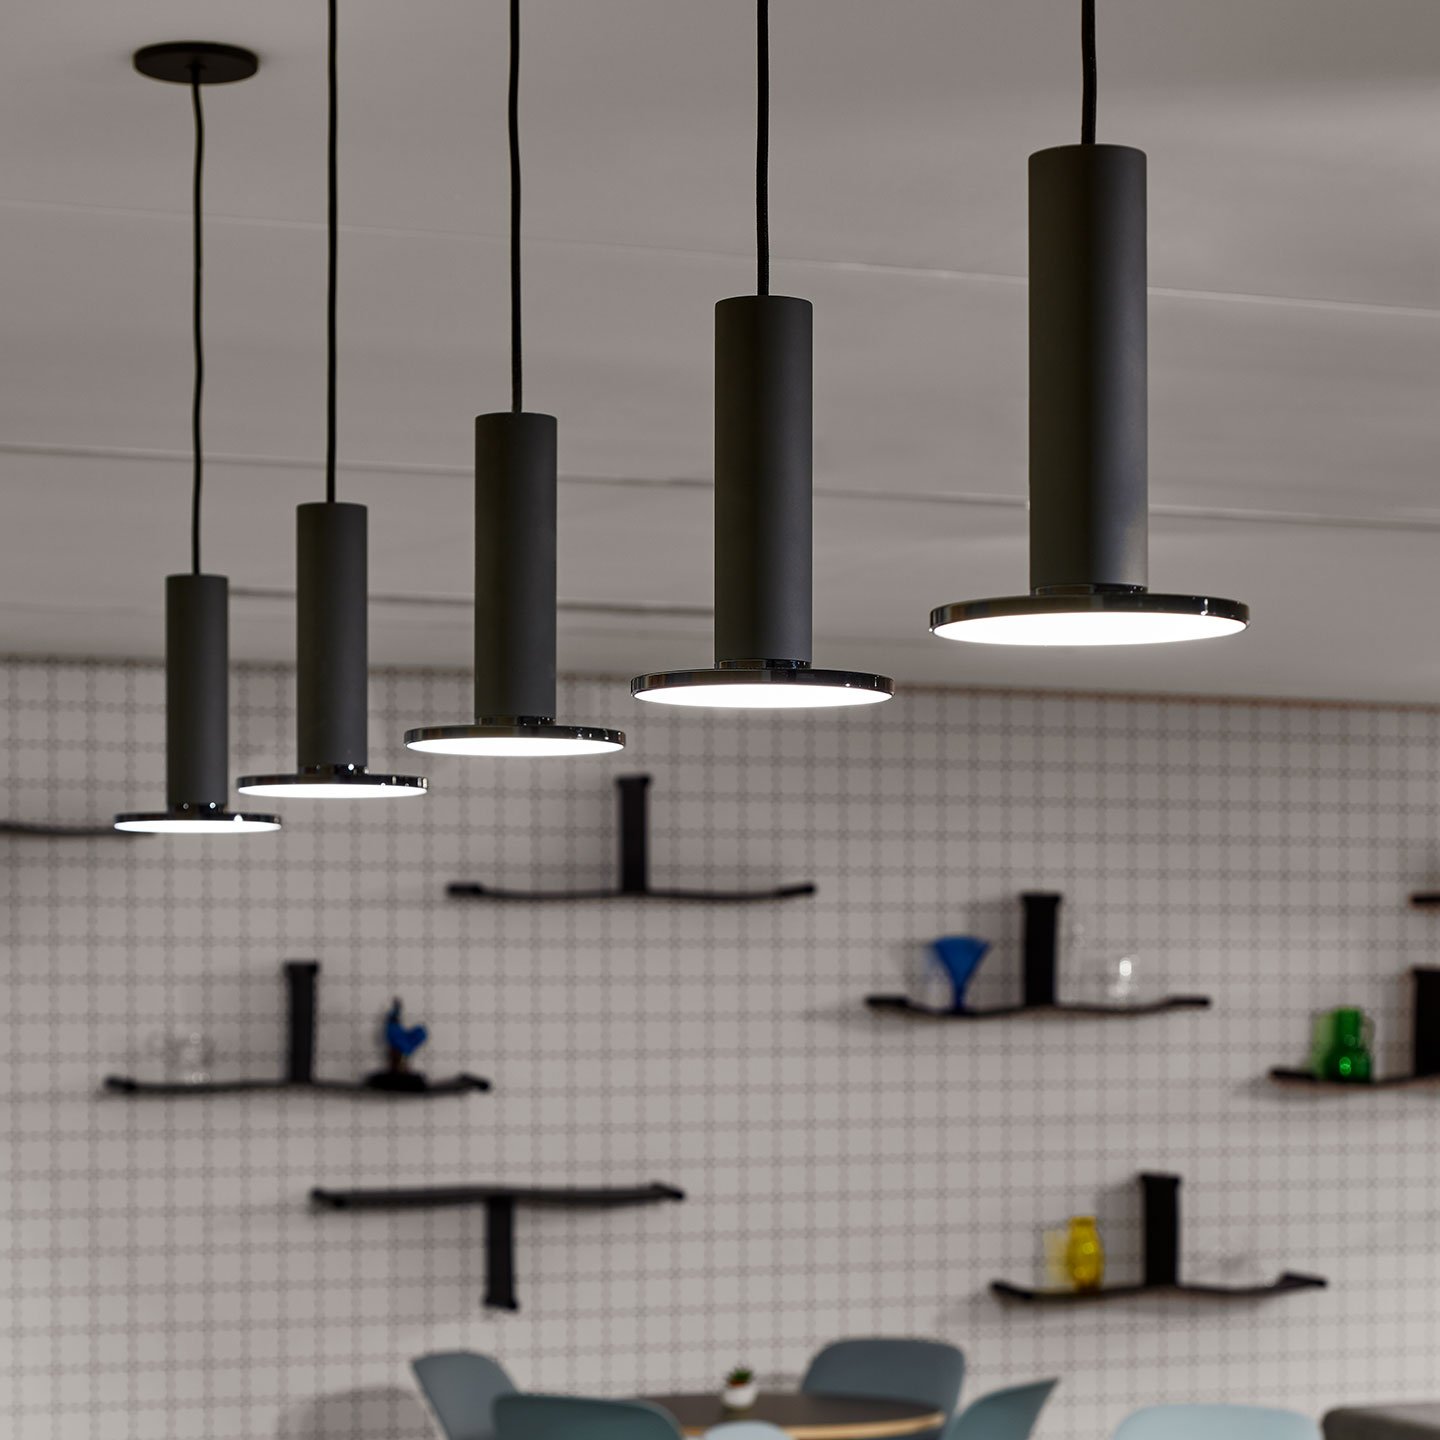 Haworth Cielo Lighting in black hanging from cieling in open office space with white walls